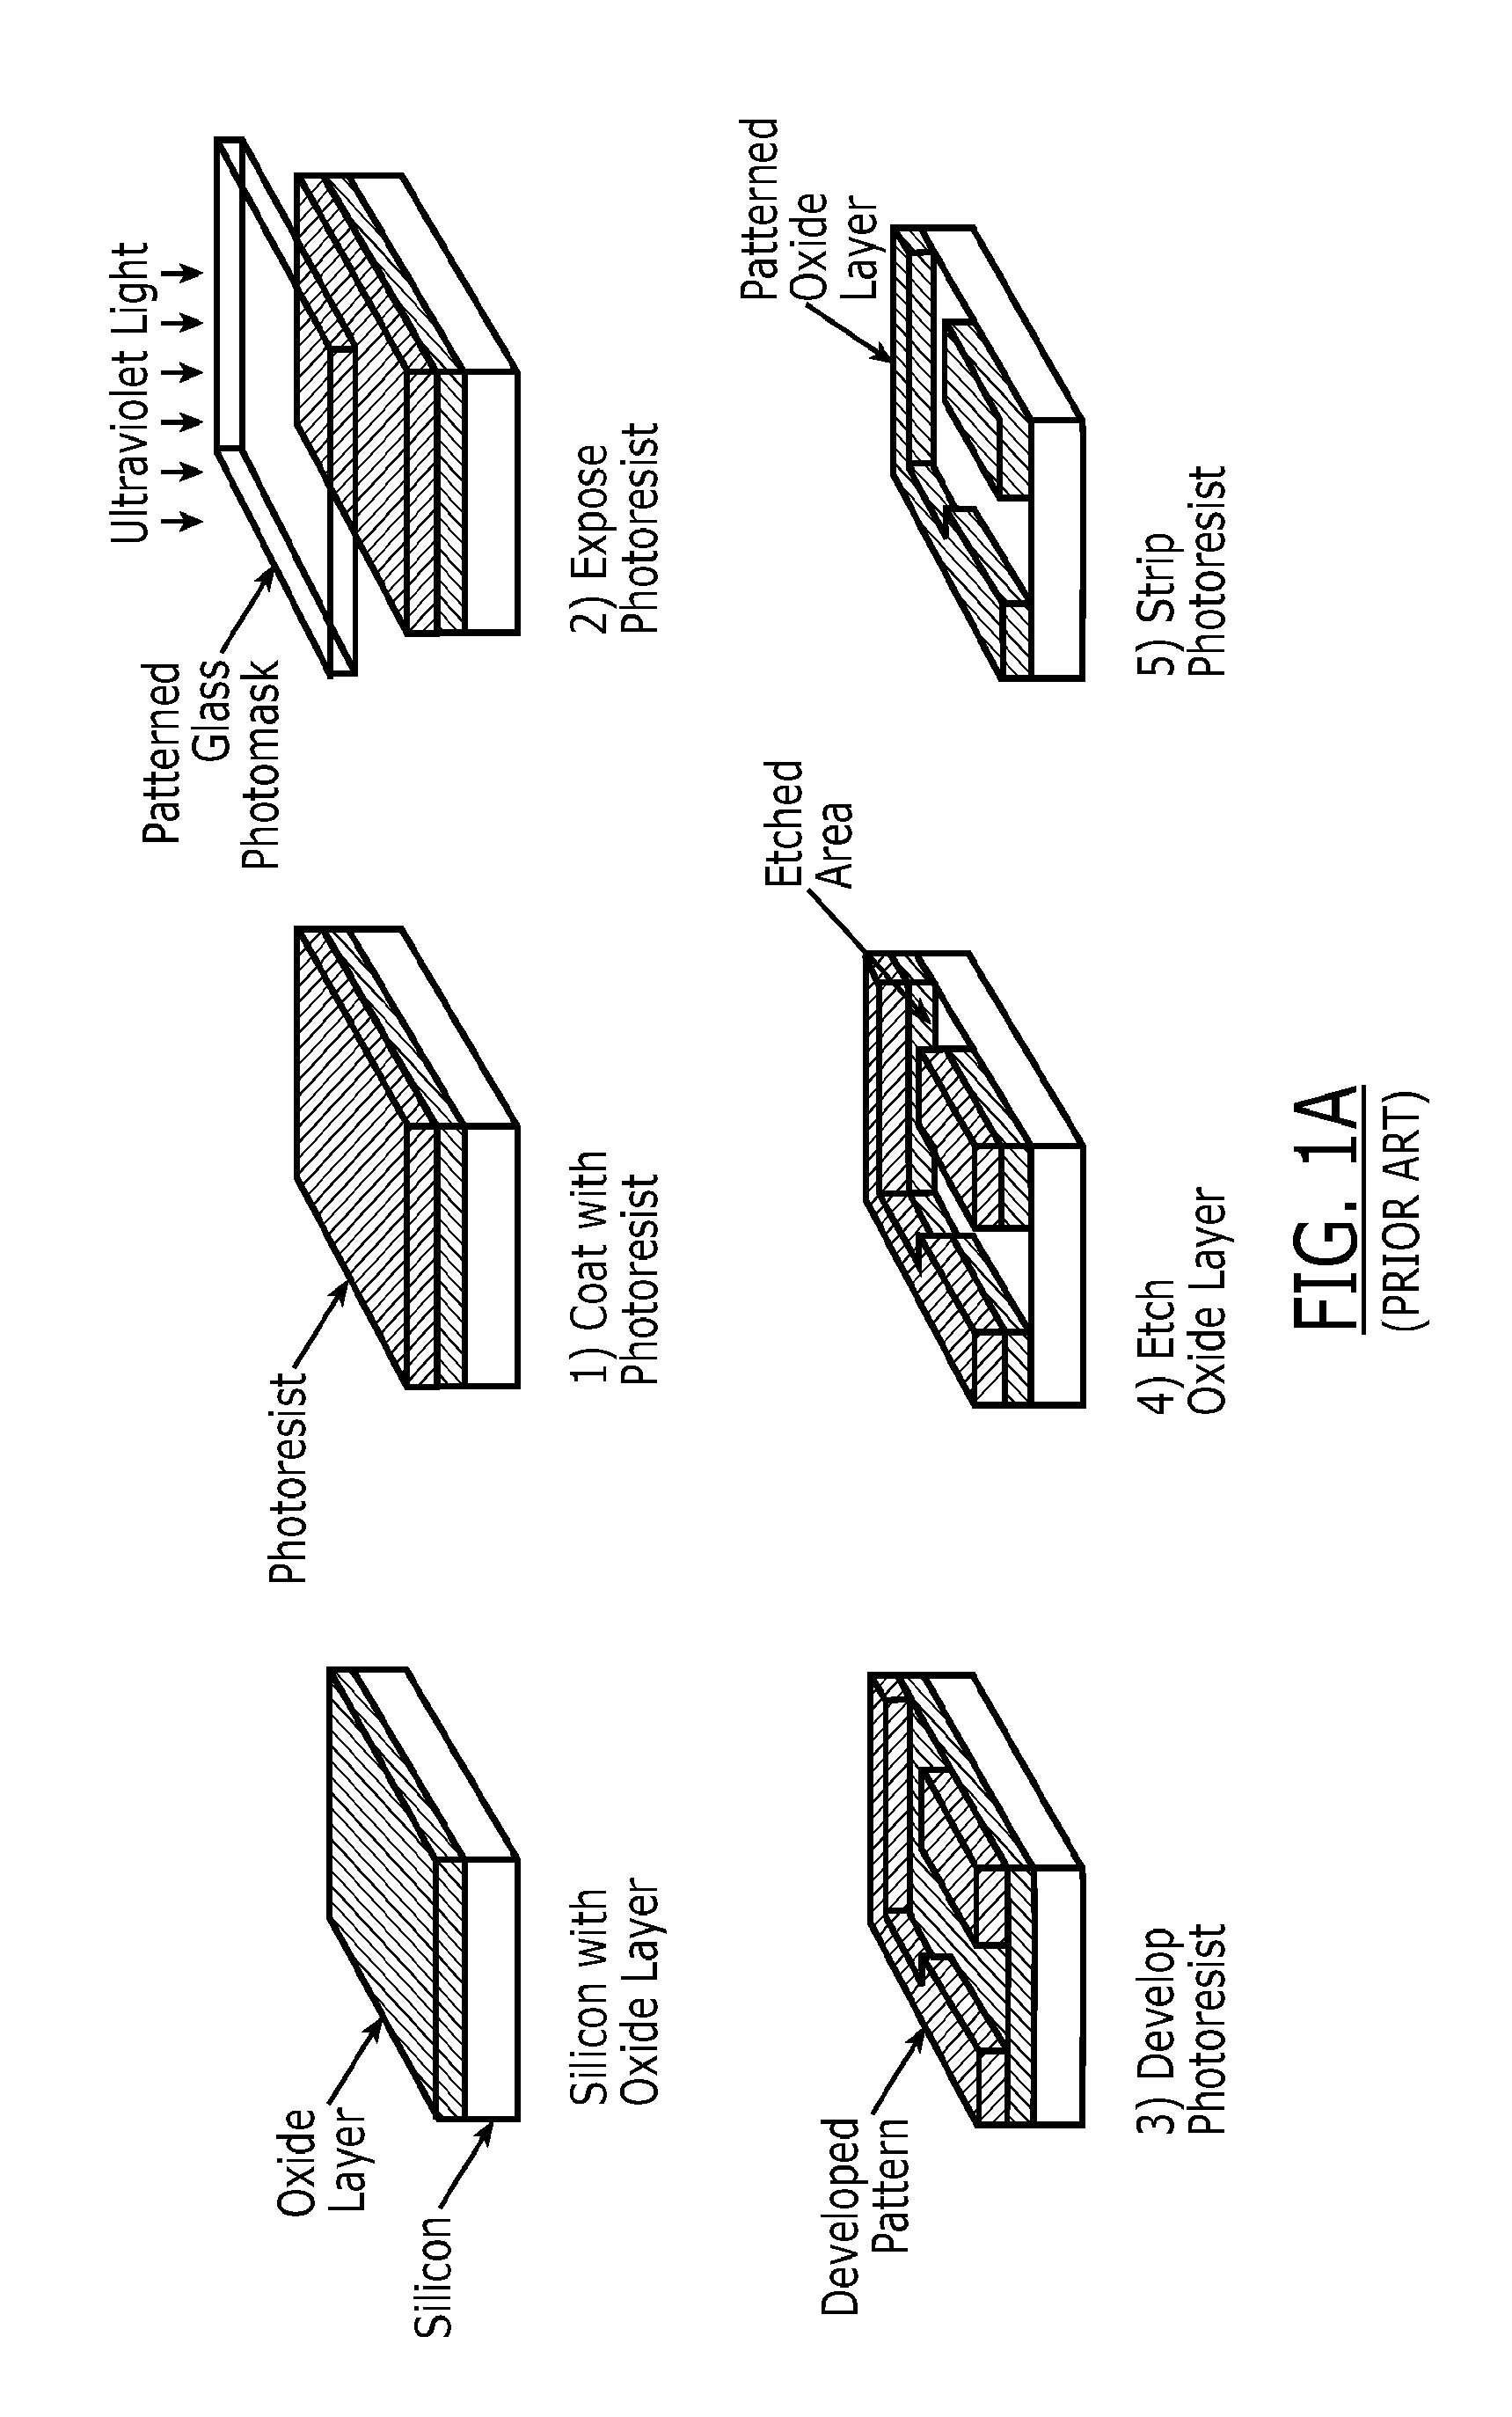 Silicon microsystems for high-throughput analysis of neural circuit activity, method and process for making the same